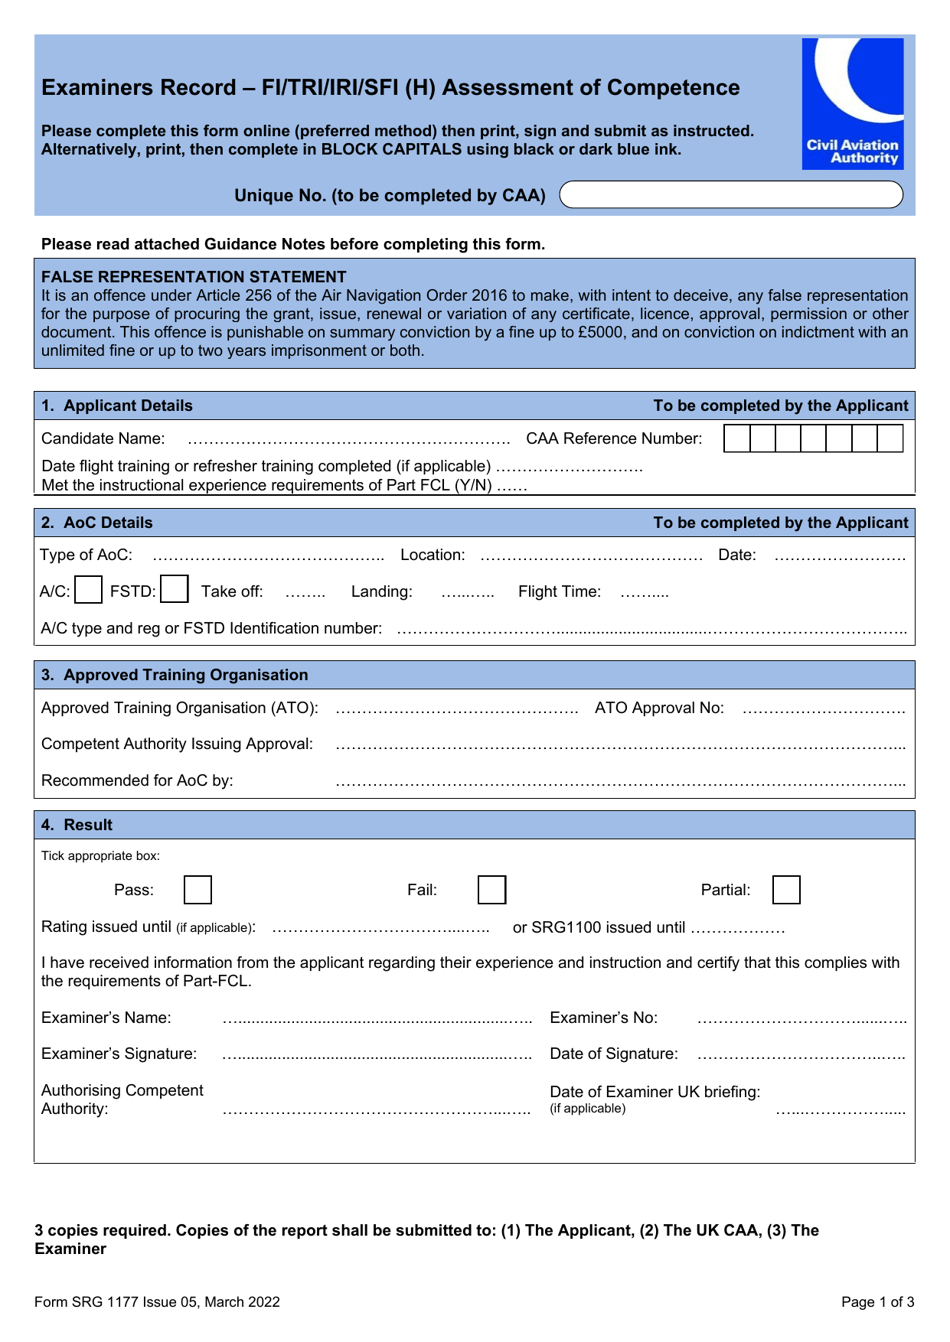 Form SRG1177 Examiners Record - Fi / Tri / Iri / Sfi (H) Assessment of Competence - United Kingdom, Page 1